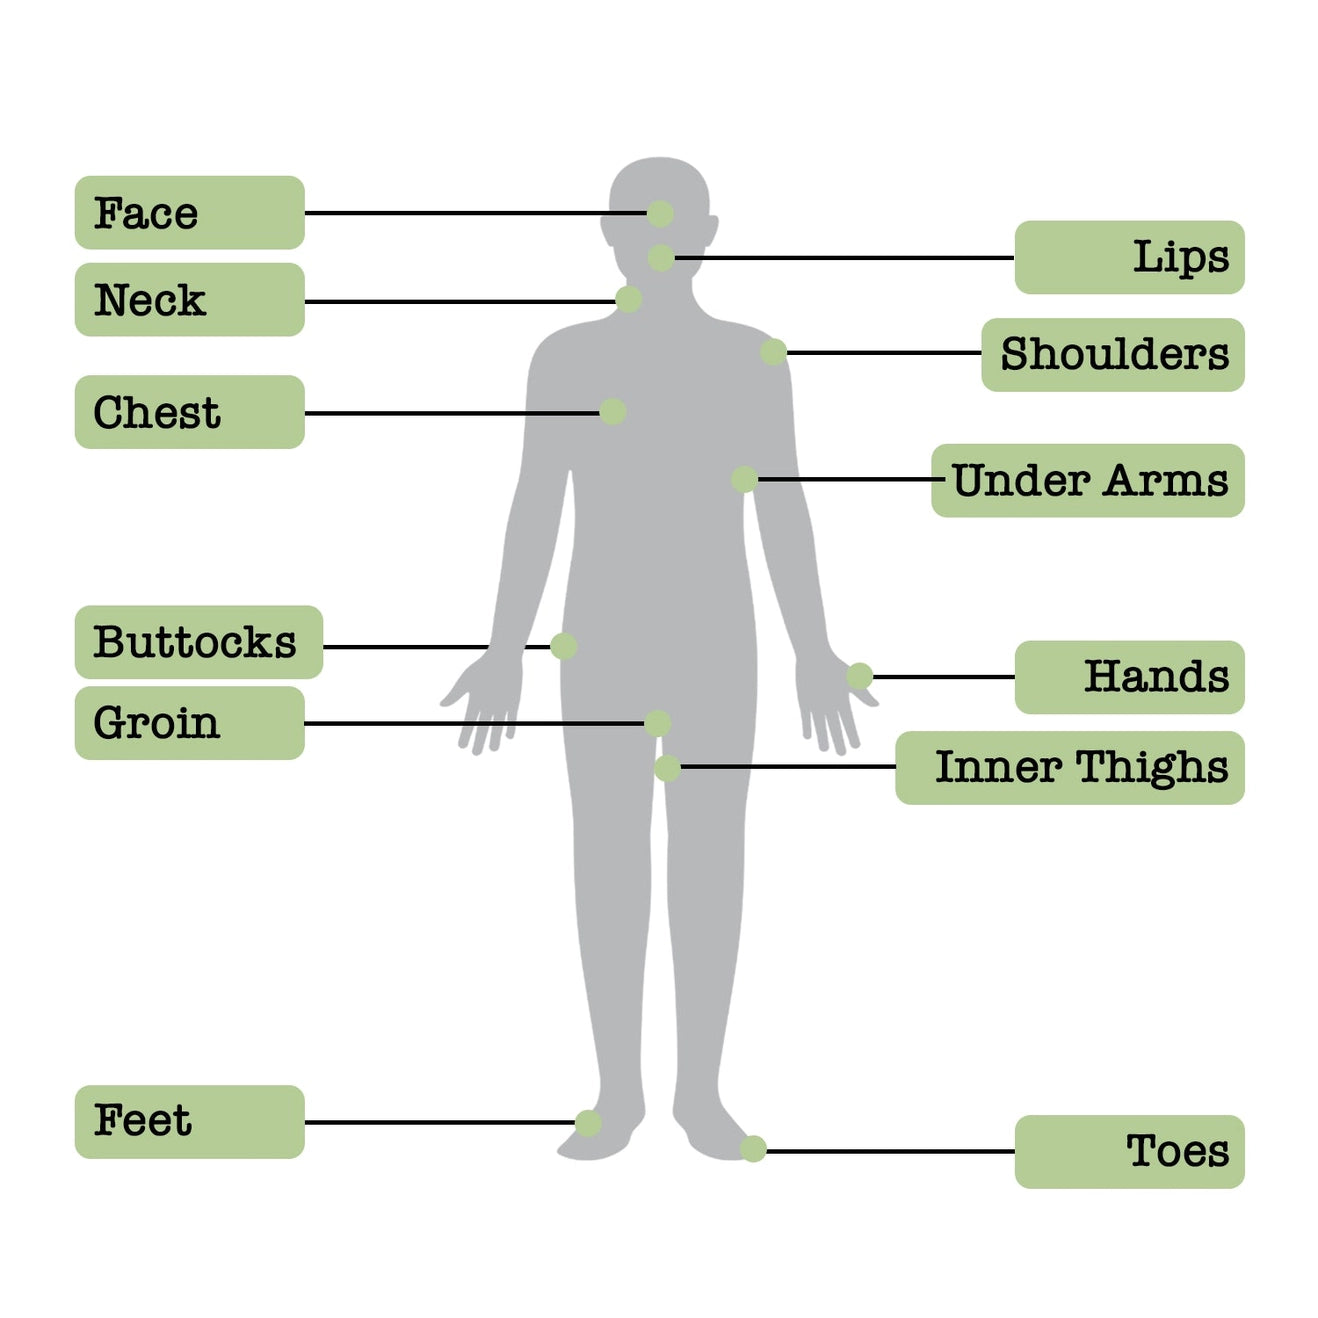 Diagram illustrating potential application areas for Squirrel's Nut Butter Anti-Chafe on the human body, highlighting areas like thighs, underarms, and feet.